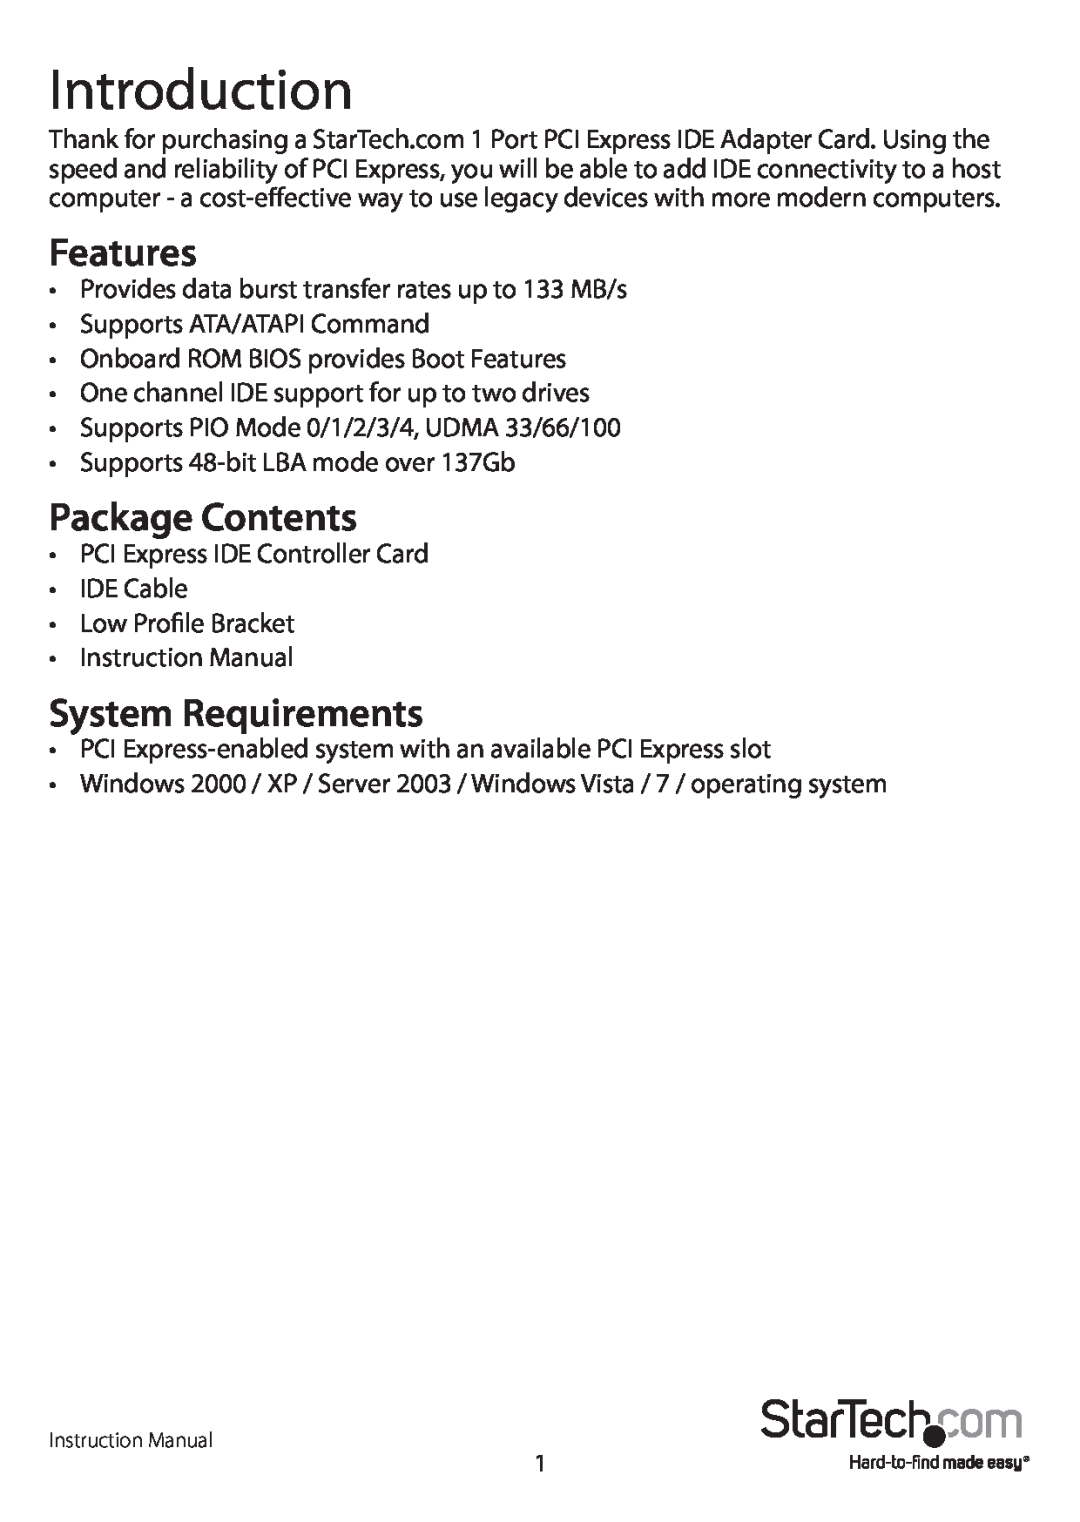 StarTech.com 1 port pci express ide controller adapter card Introduction, Features, Package Contents, System Requirements 